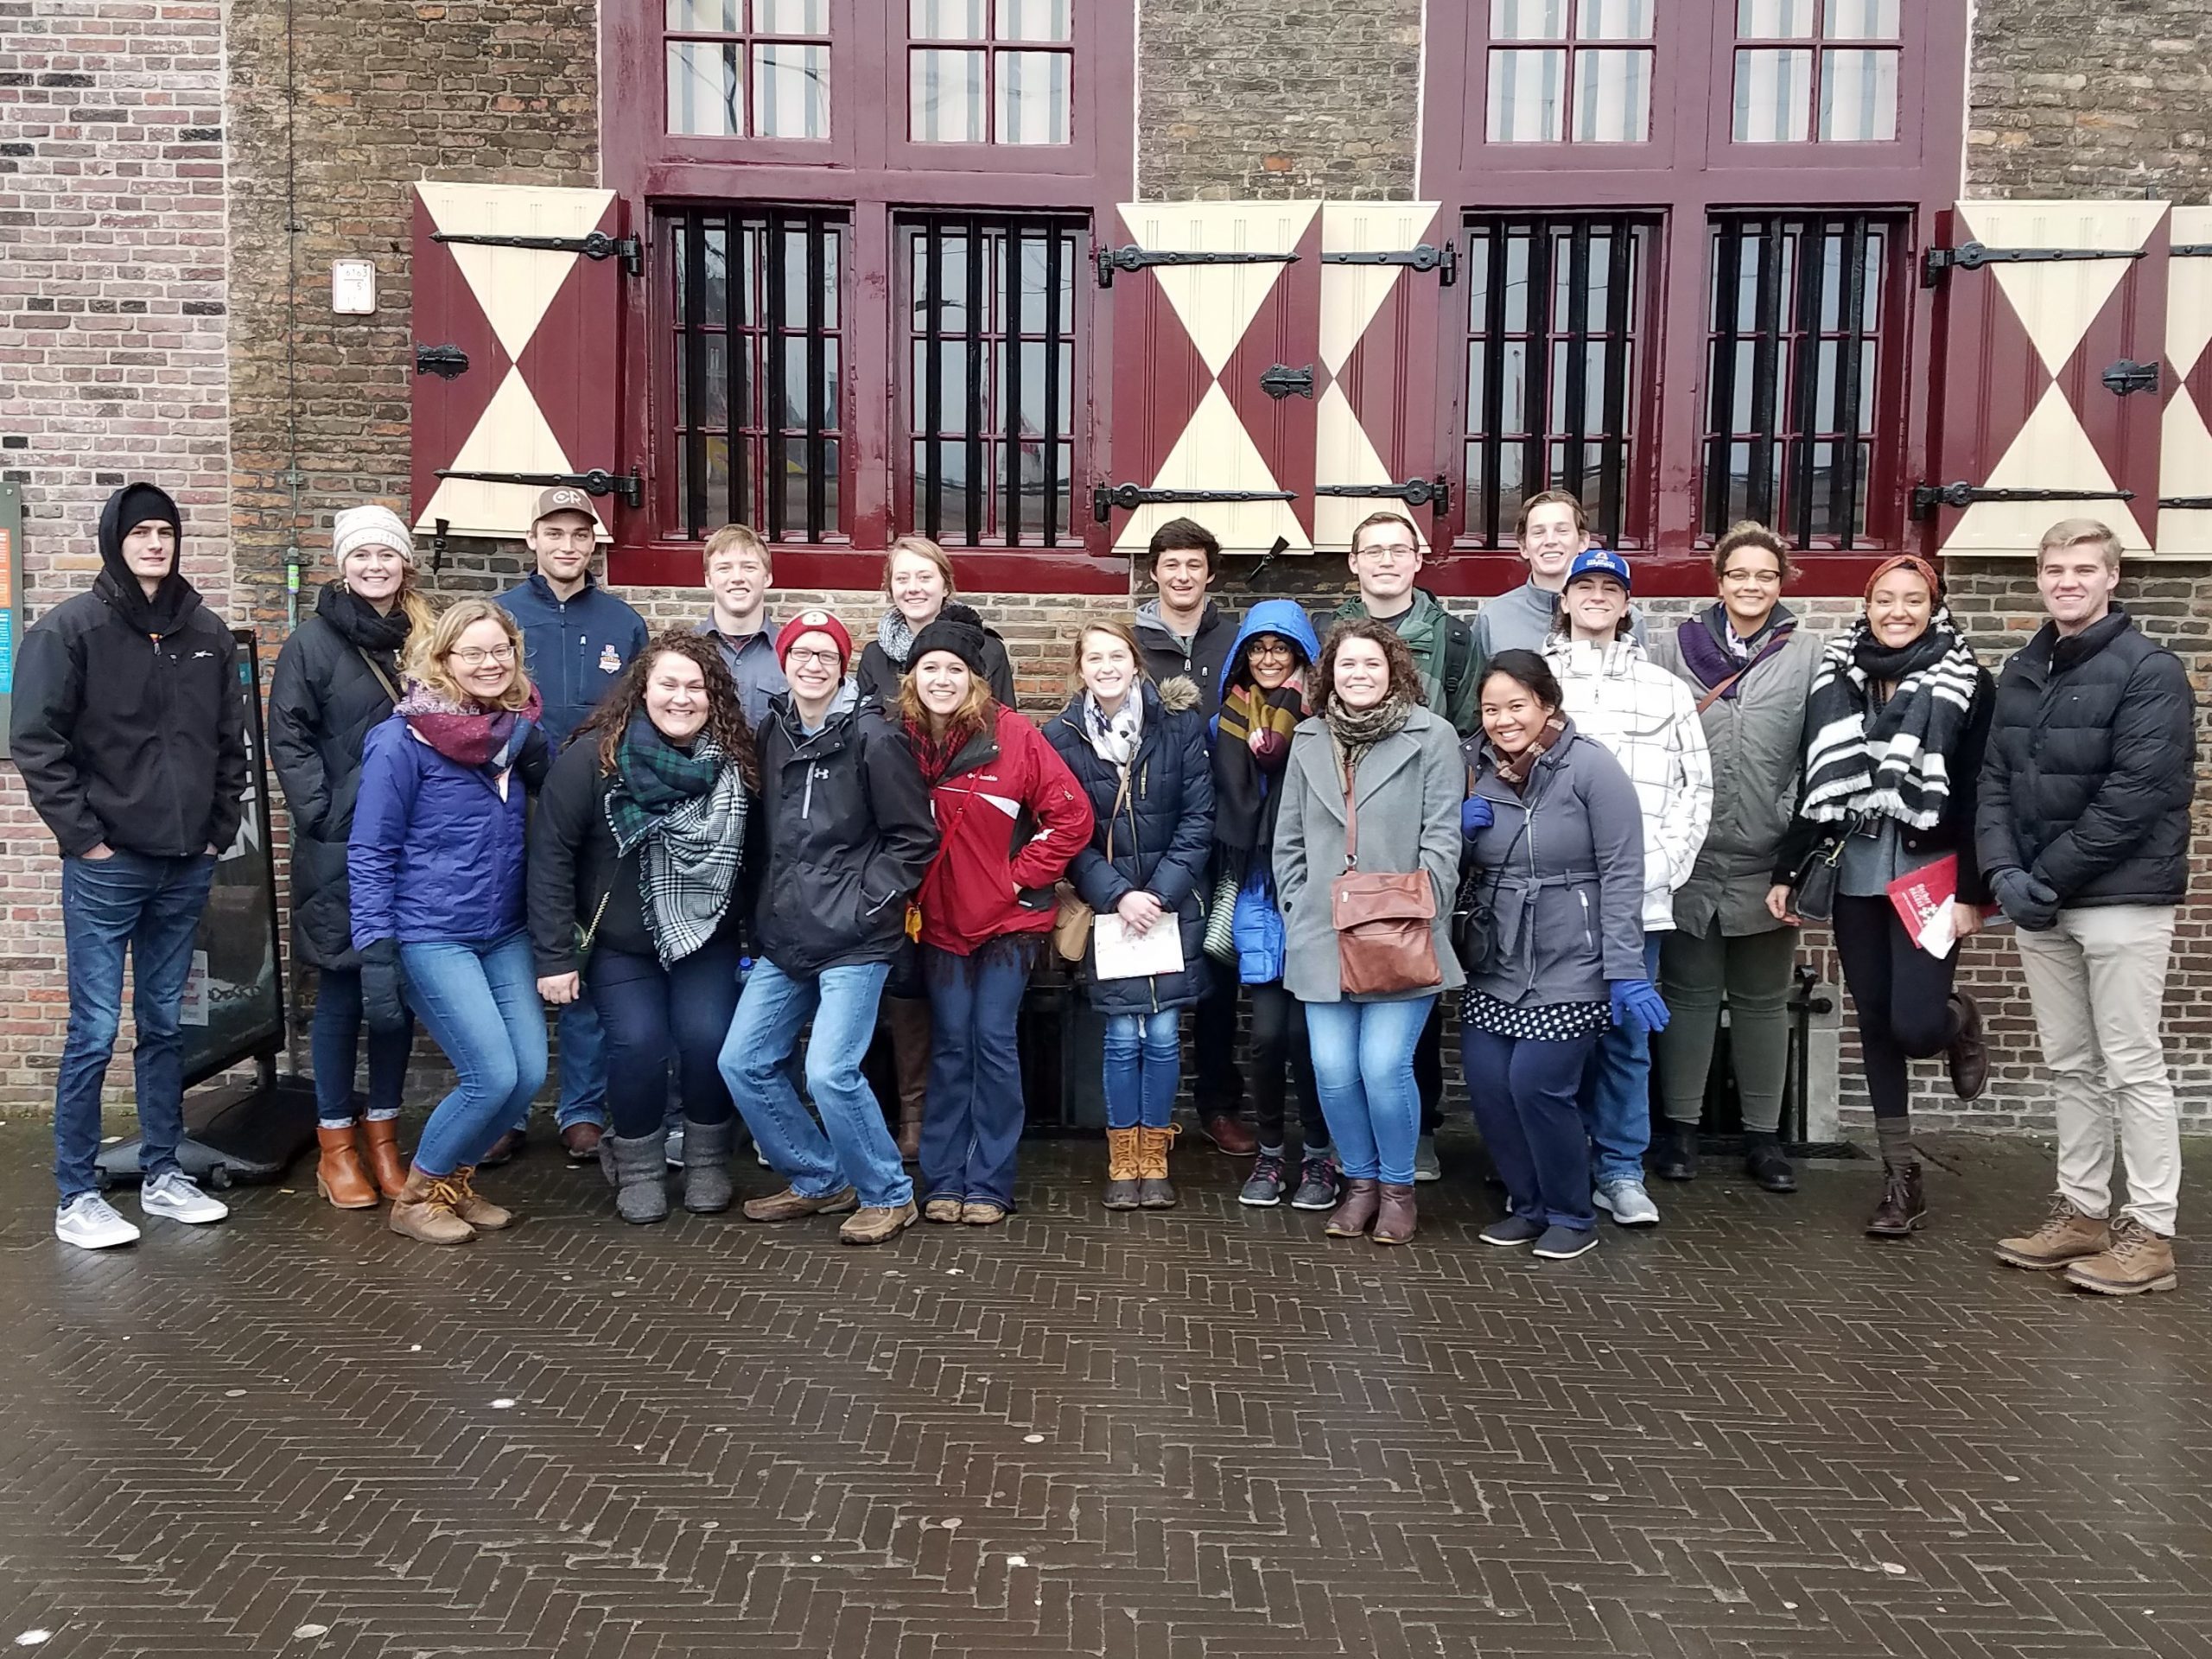 The 2016-17 cohort during their trip to the Netherlands in January 2017.